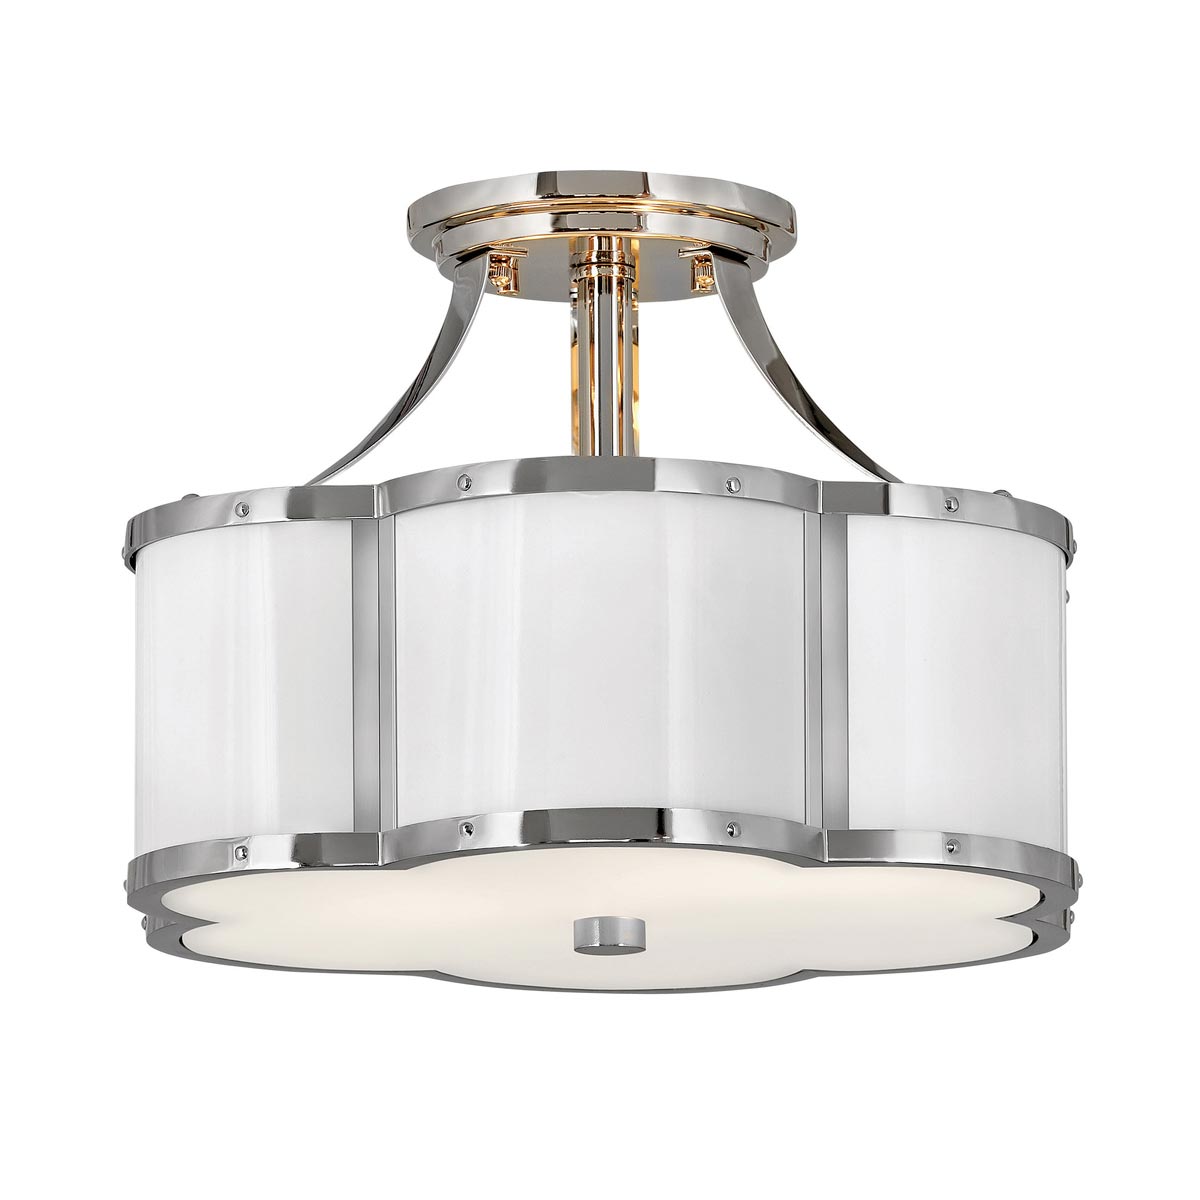 Quintiesse Chance Semi Flush Ceiling 2 Light Polished Nickel Opal Glass